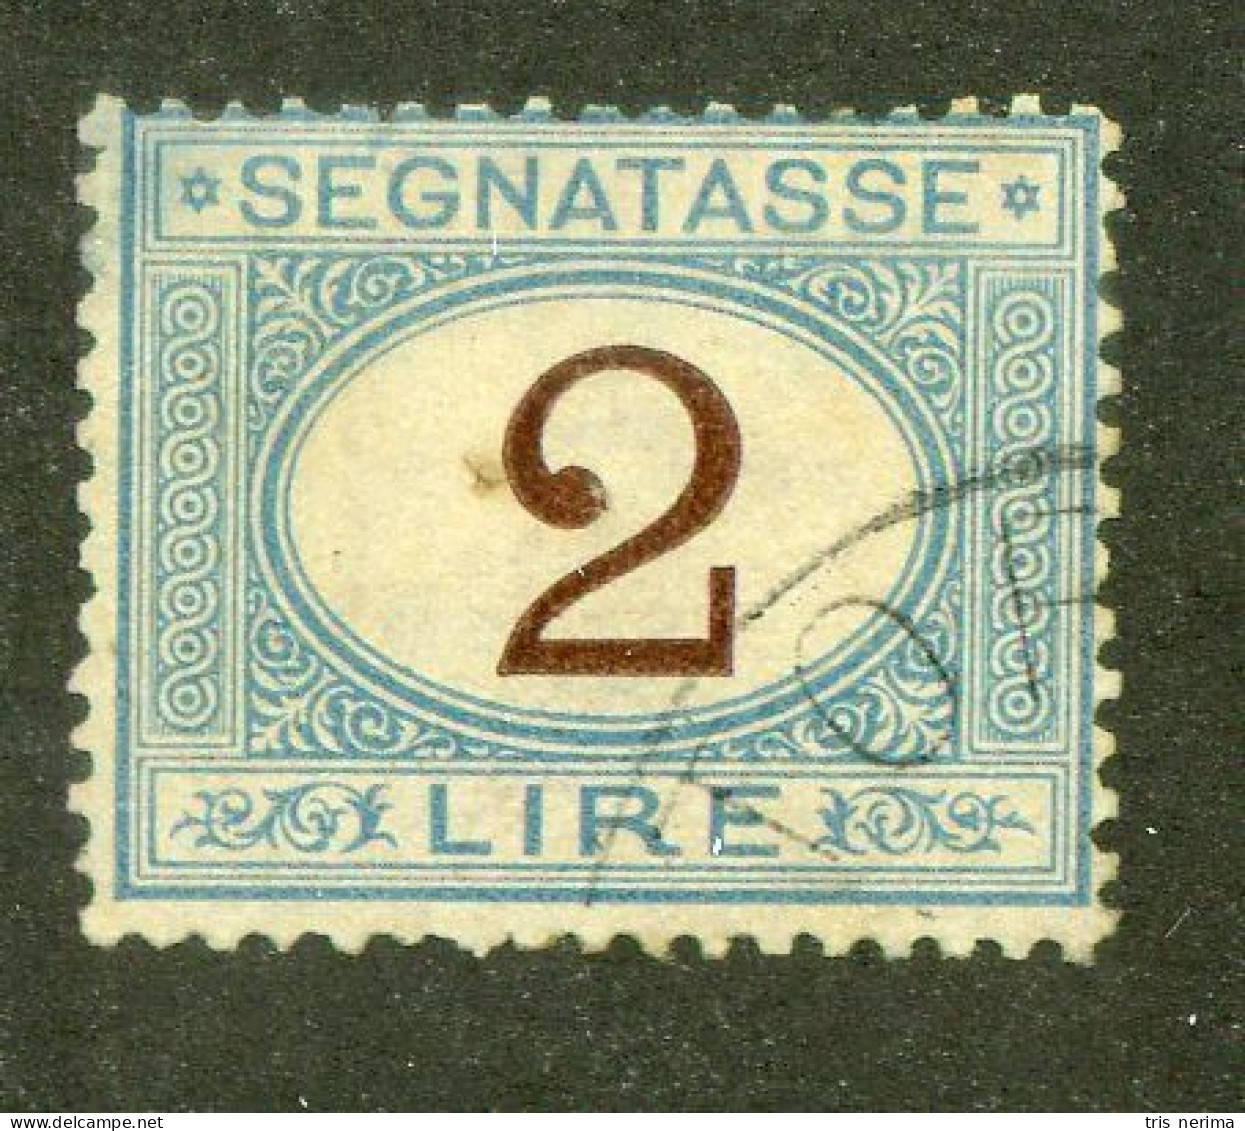 996 Italy 1870 Scott #J15 Used (Lower Bids 20% Off) - Postage Due